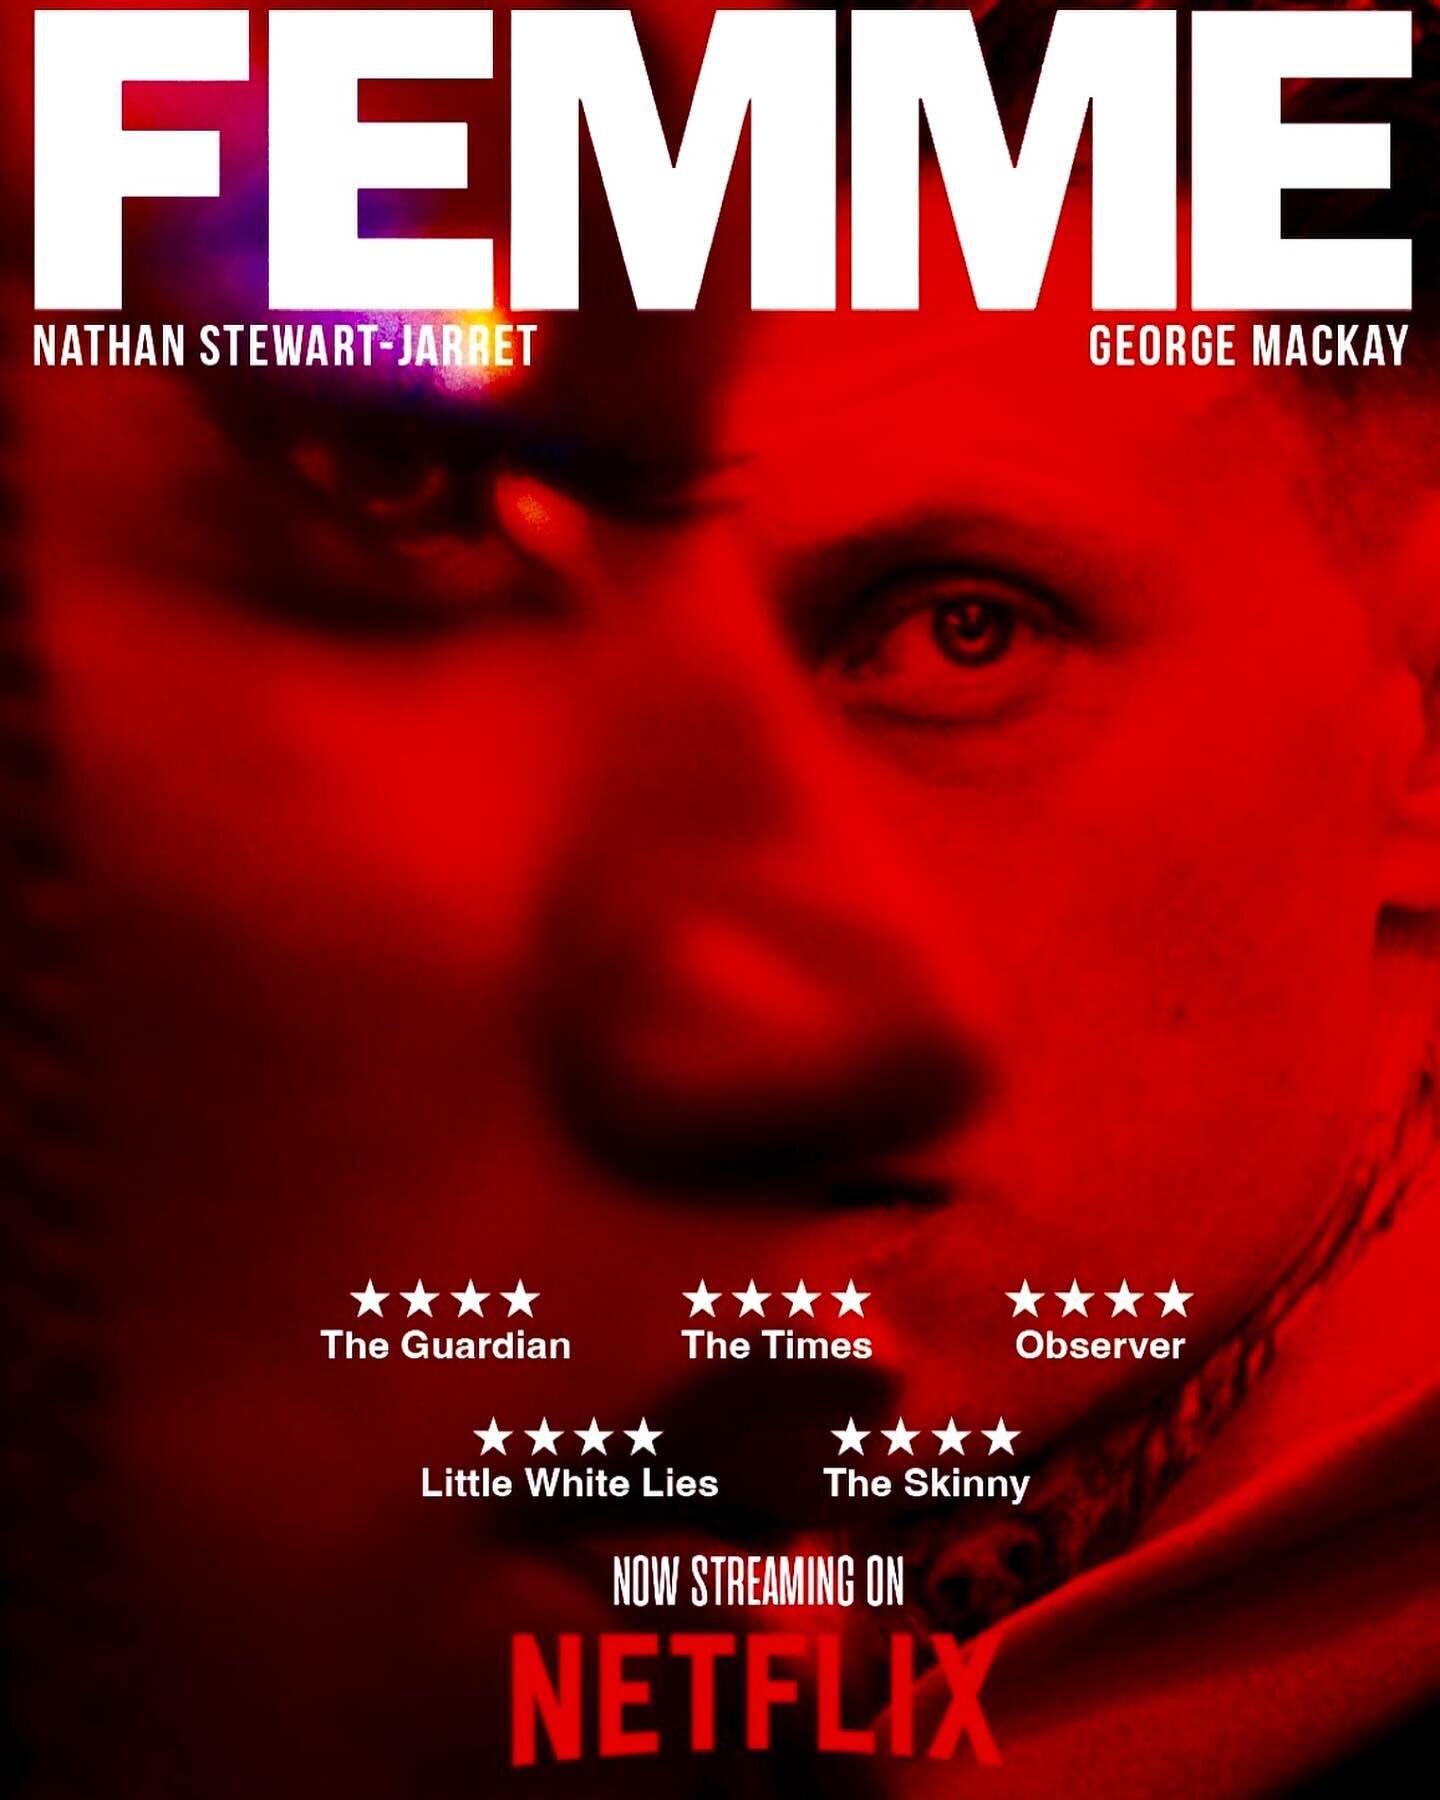 Femme, is an erotic thriller which was released in cinemas last year but is now available on @netflix ⁣
⁣
The plot follows a drag queen who is assaulted in a homophobic attack and the repercussions that this has on everyone involved. ⁣
⁣
Cast - @nath